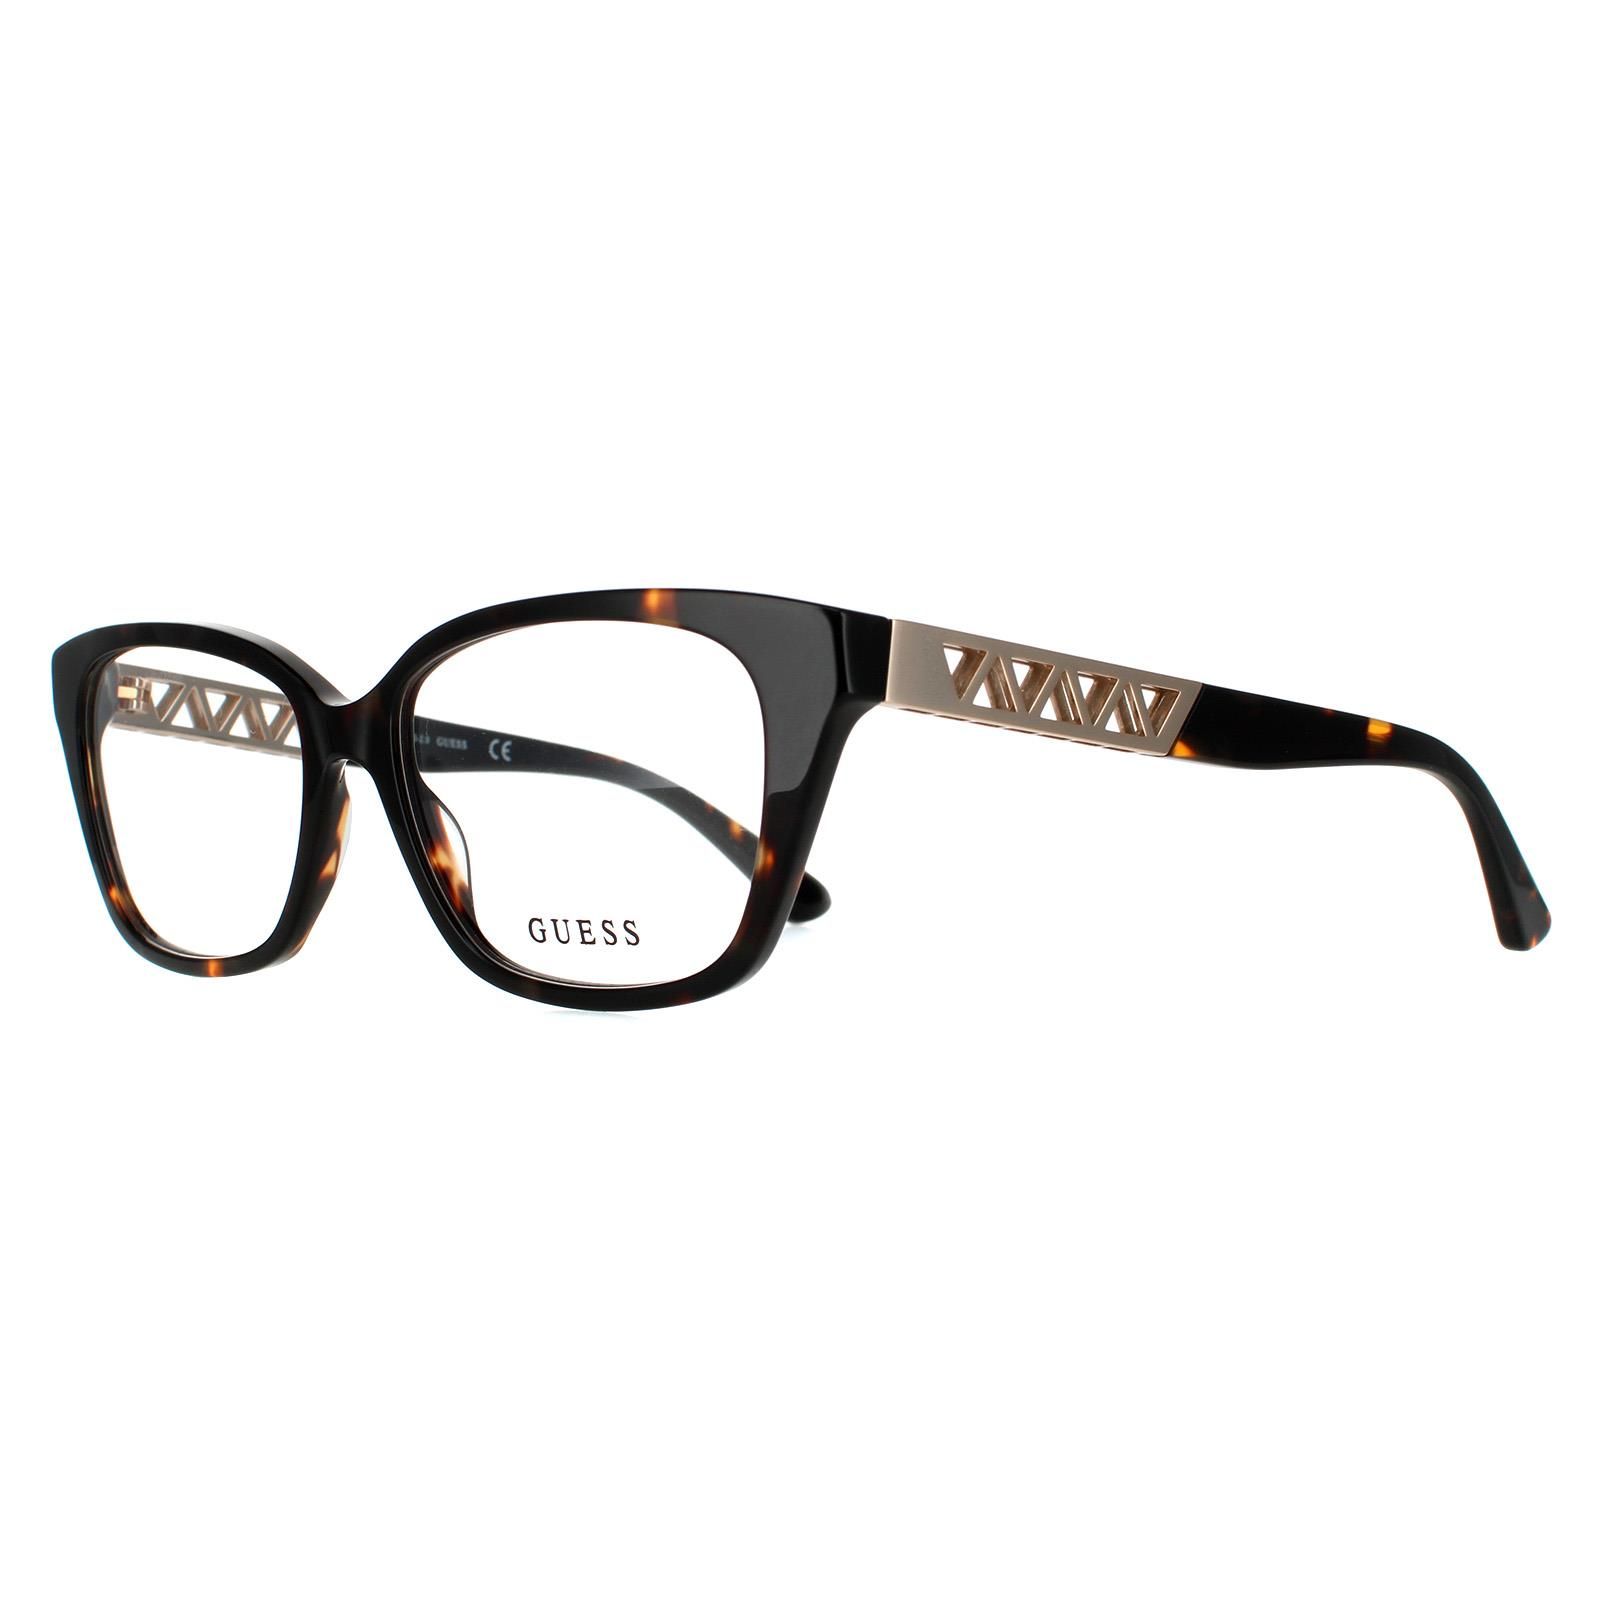 Guess Rectangular Womens Dark Havana Glasses Frames GU2784 are a stunning square design crafted from lightweight plastic with a metal cut out motif along the temples that has a sparkling chain attachment.